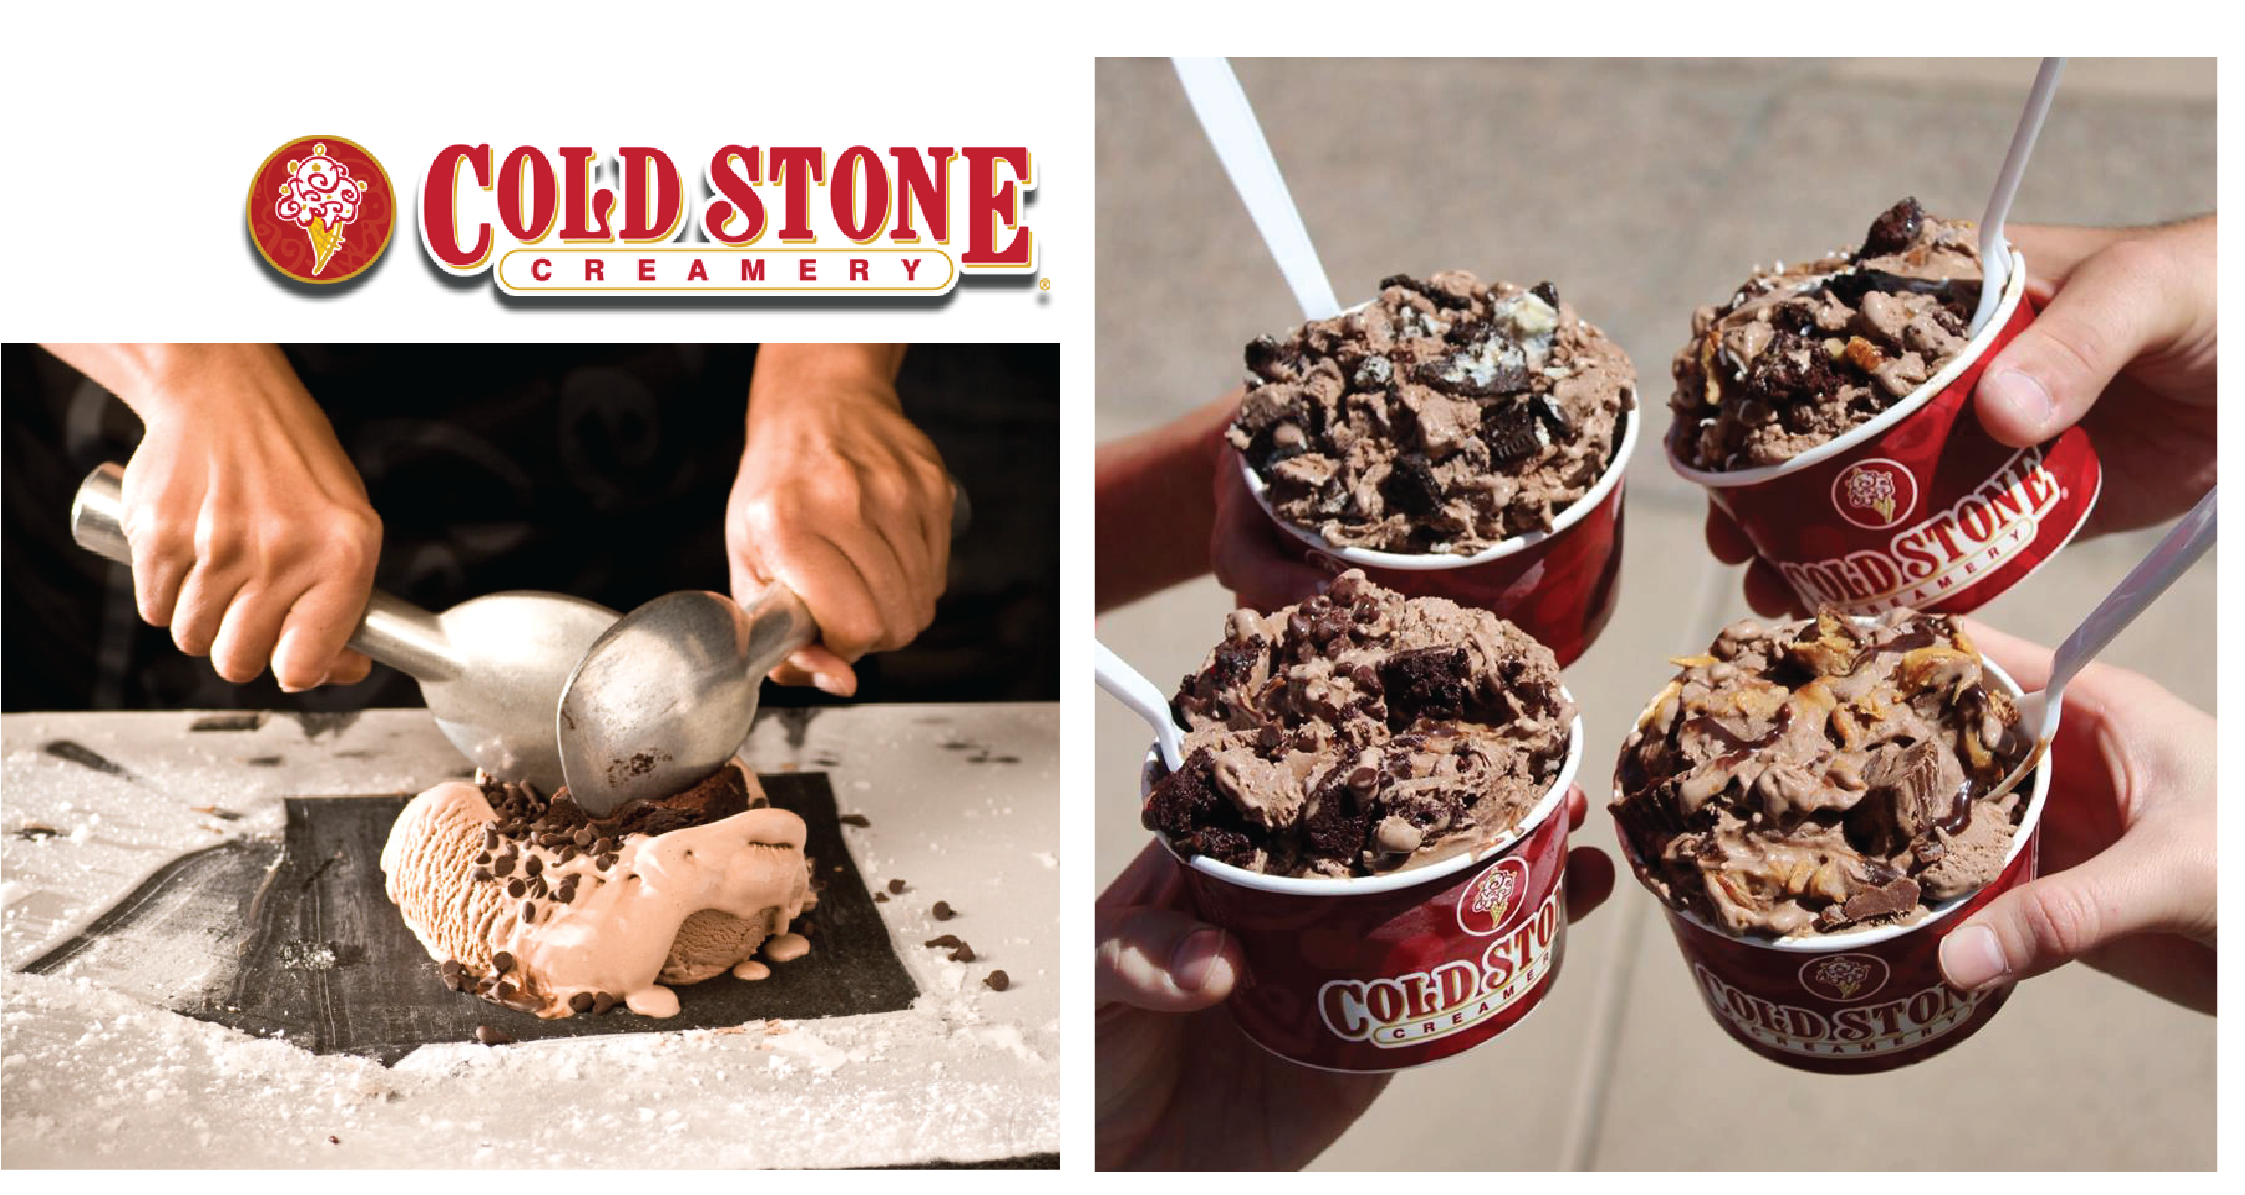 Coldstone top image client page 2020 v3